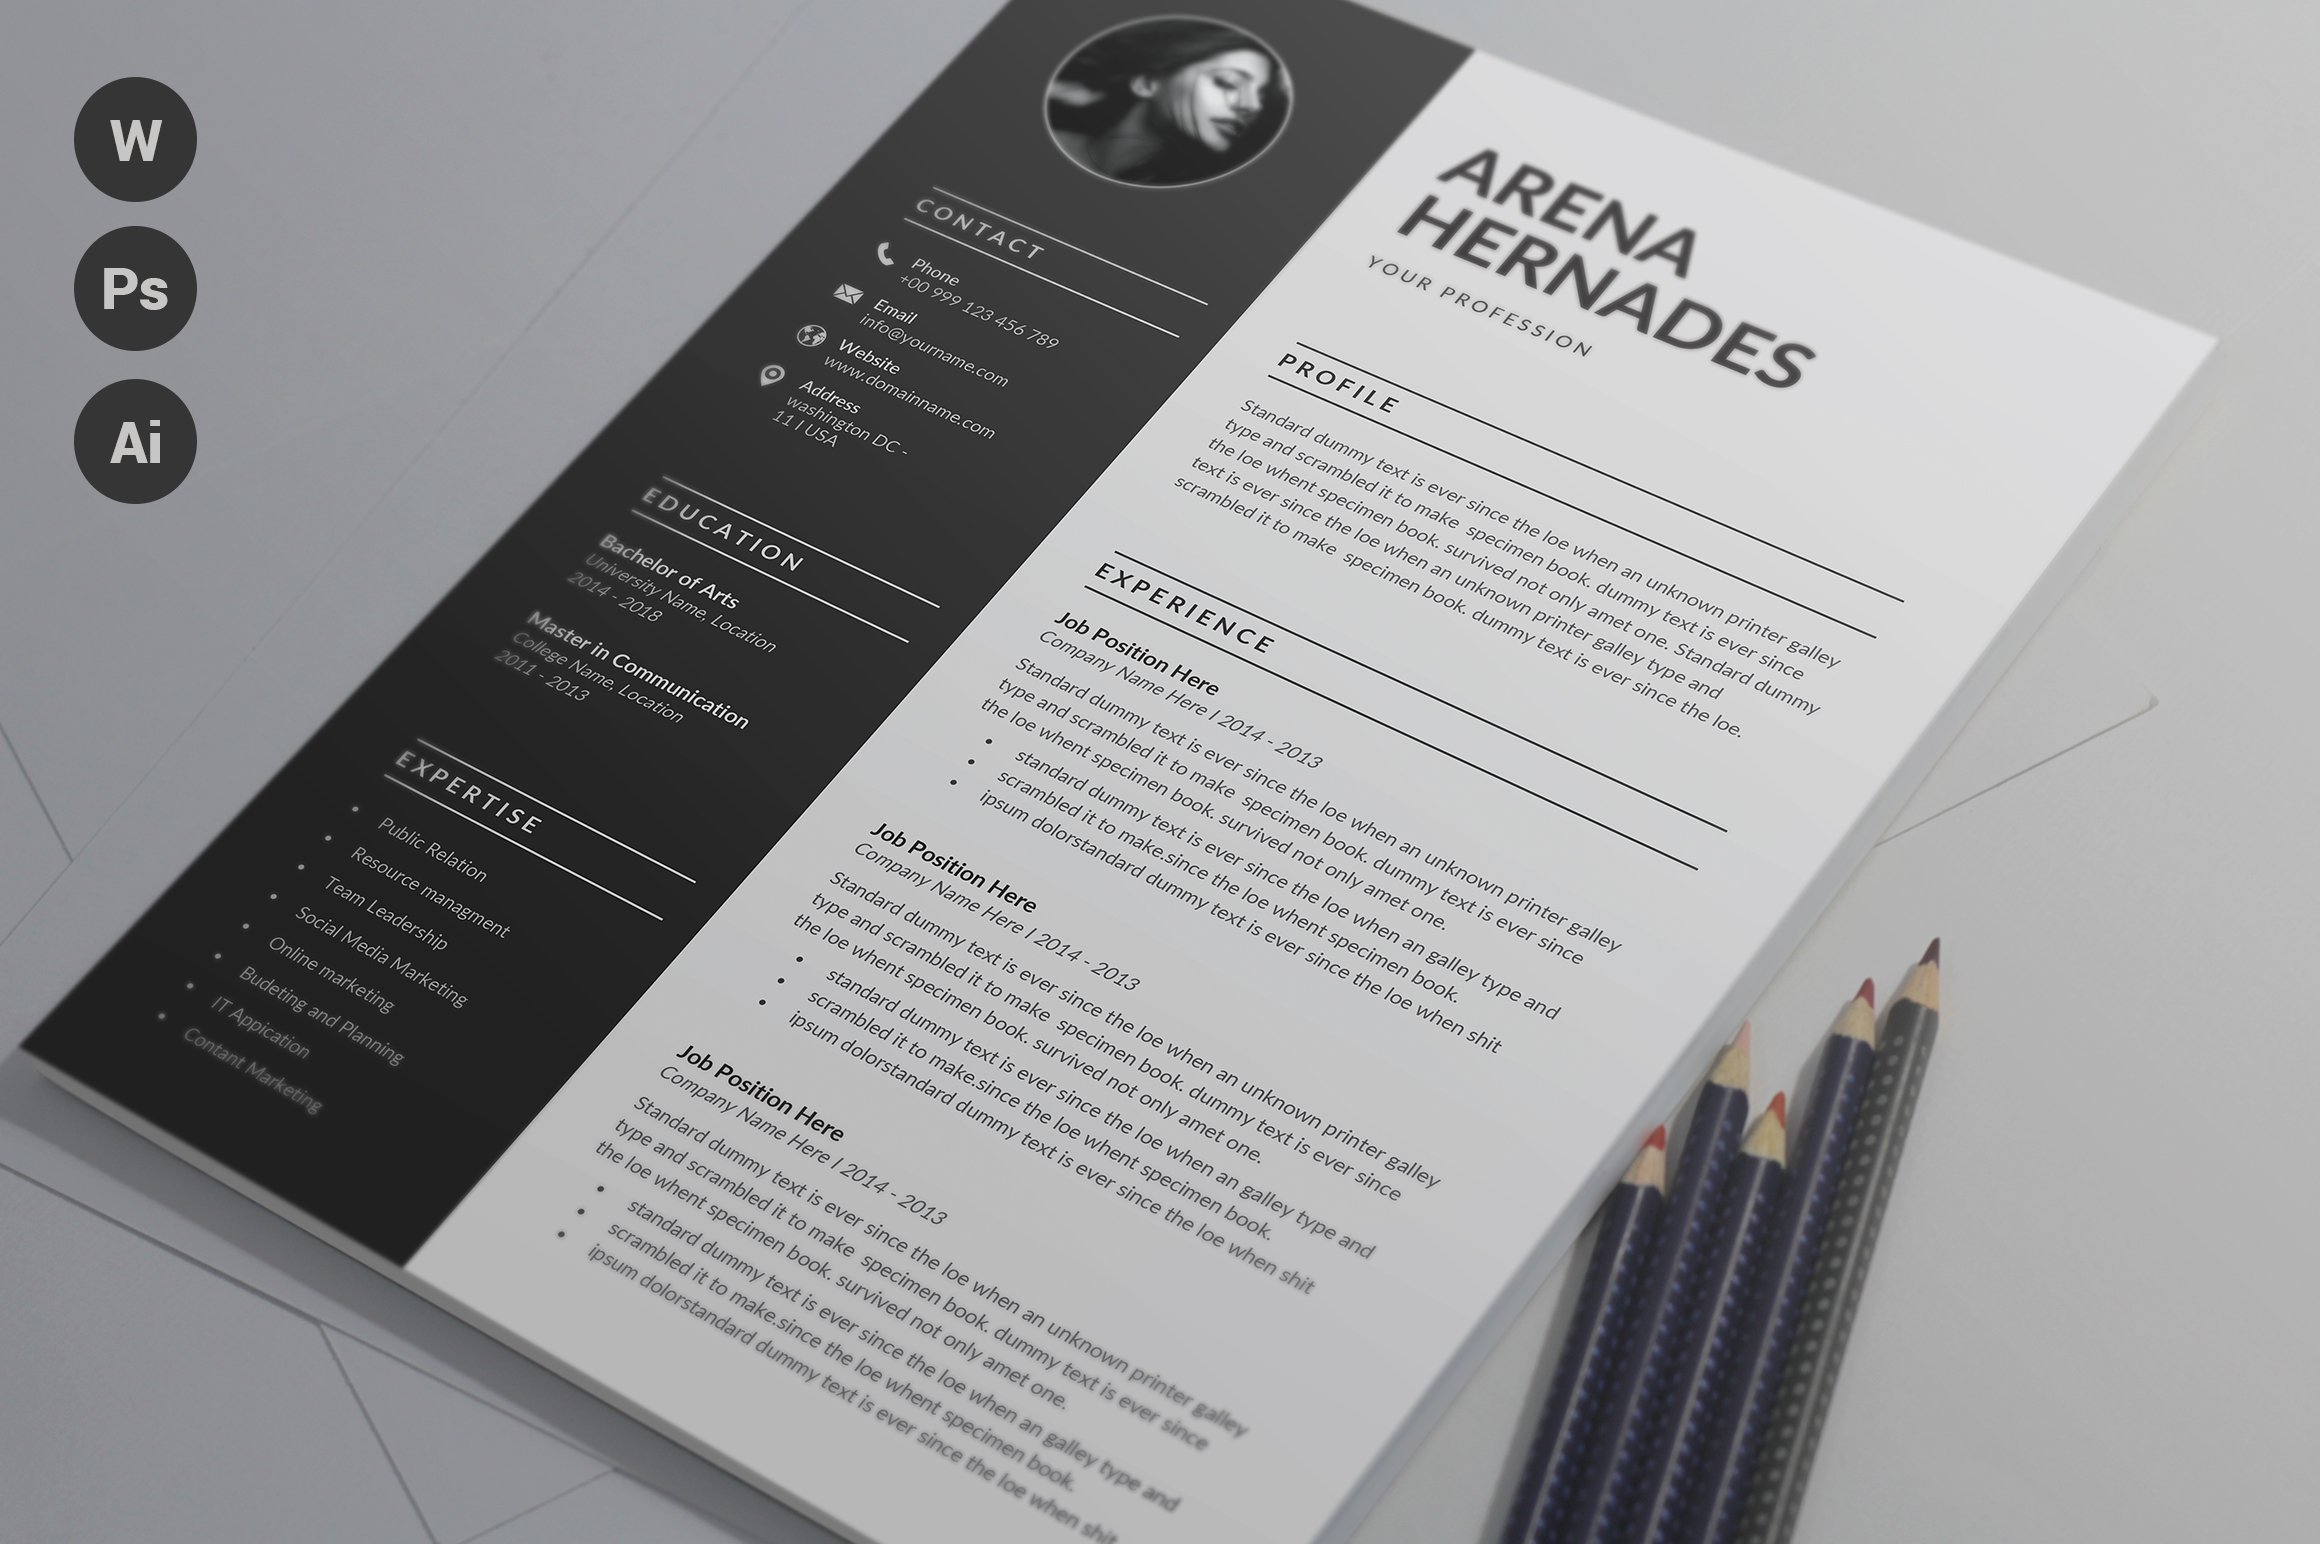 Resume Template | CV + Cover Letter cover image.